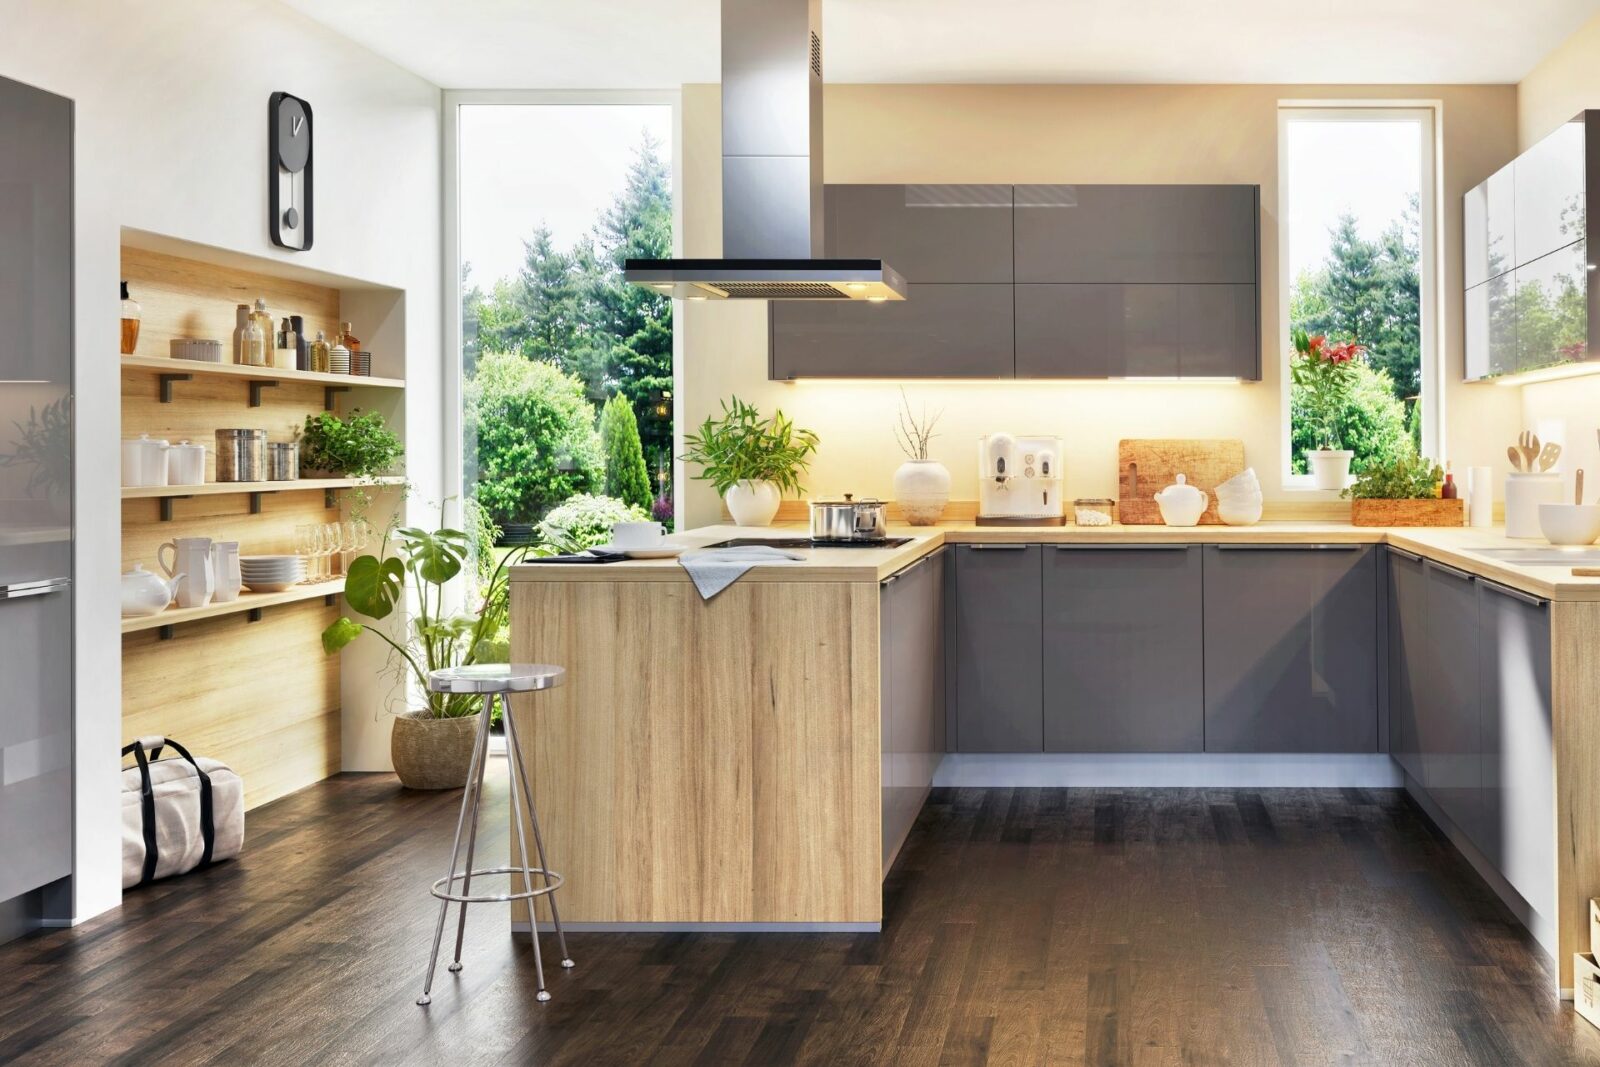 Making the Most of Your Kitchen Space